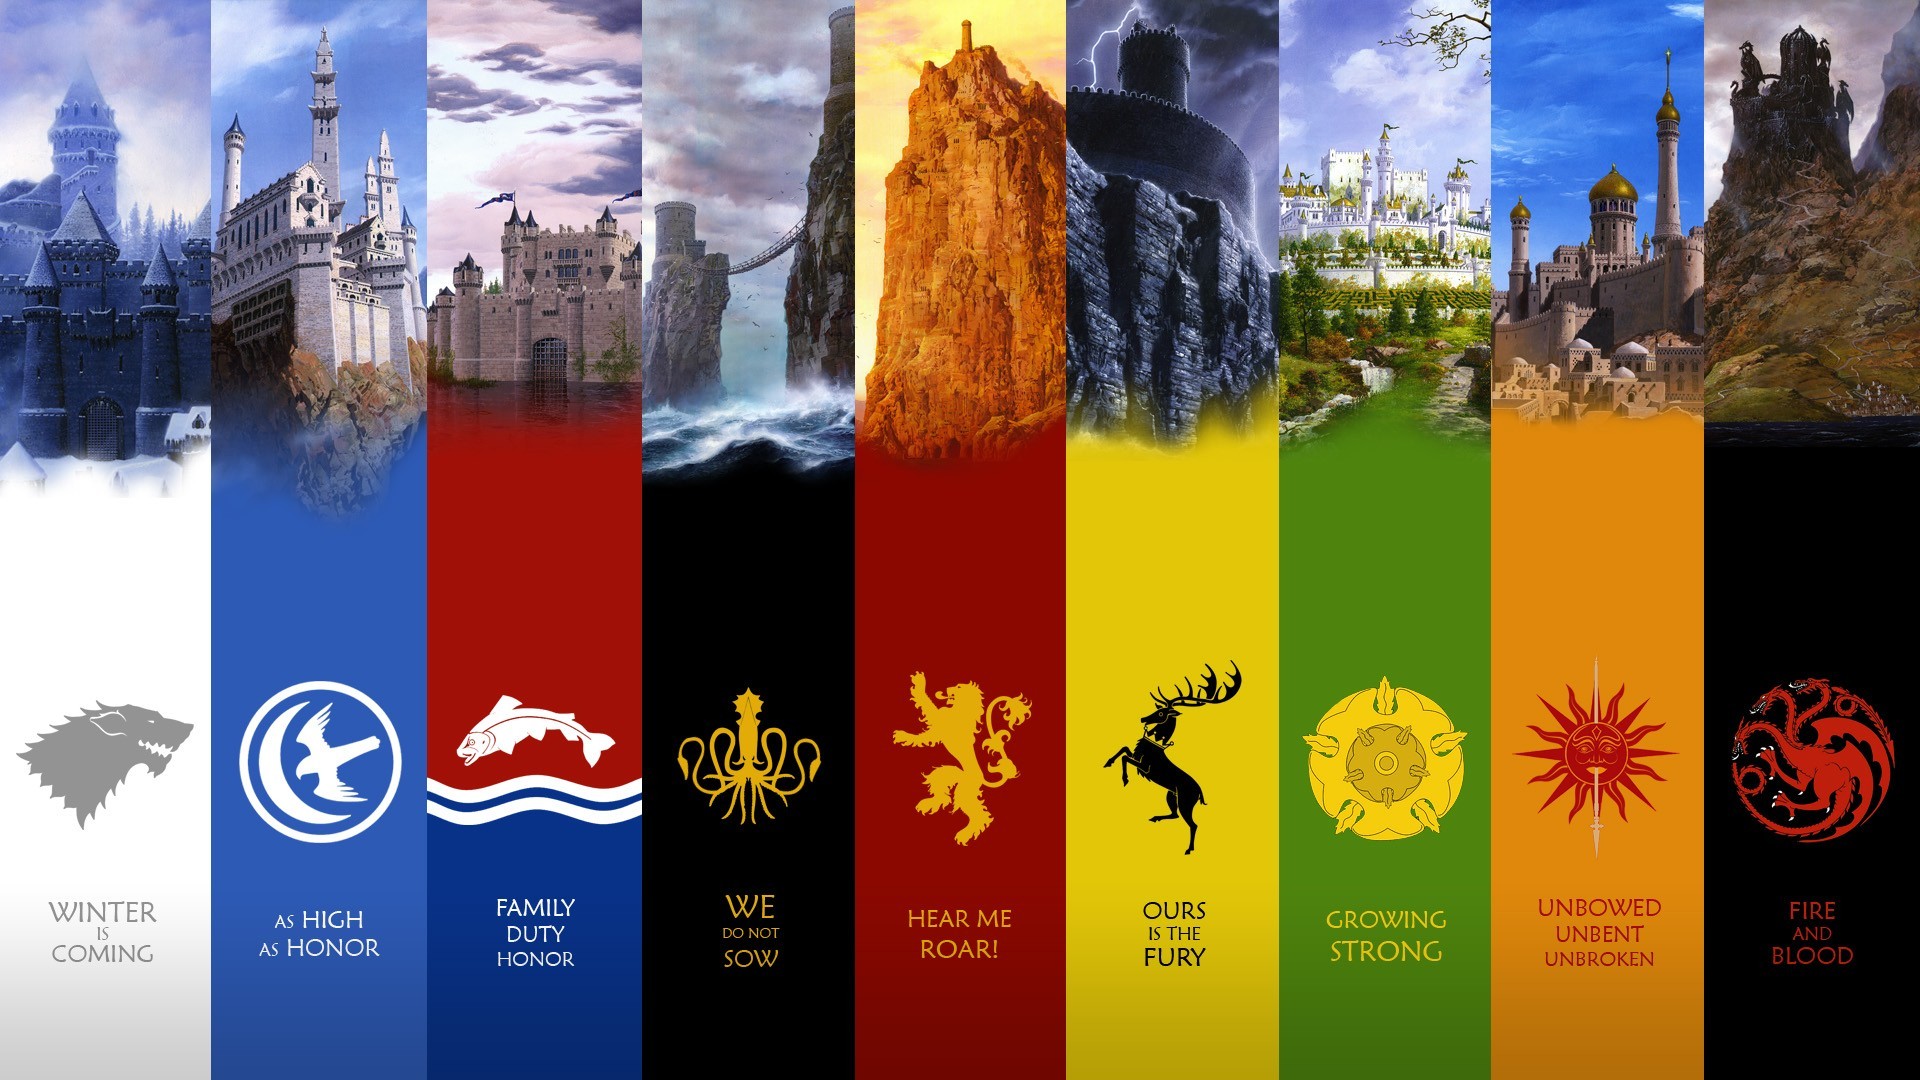 Game Of Thrones Sigils Quote Castle Panels TV Literature Collage A Song Of Ice And Fire 1920x1080